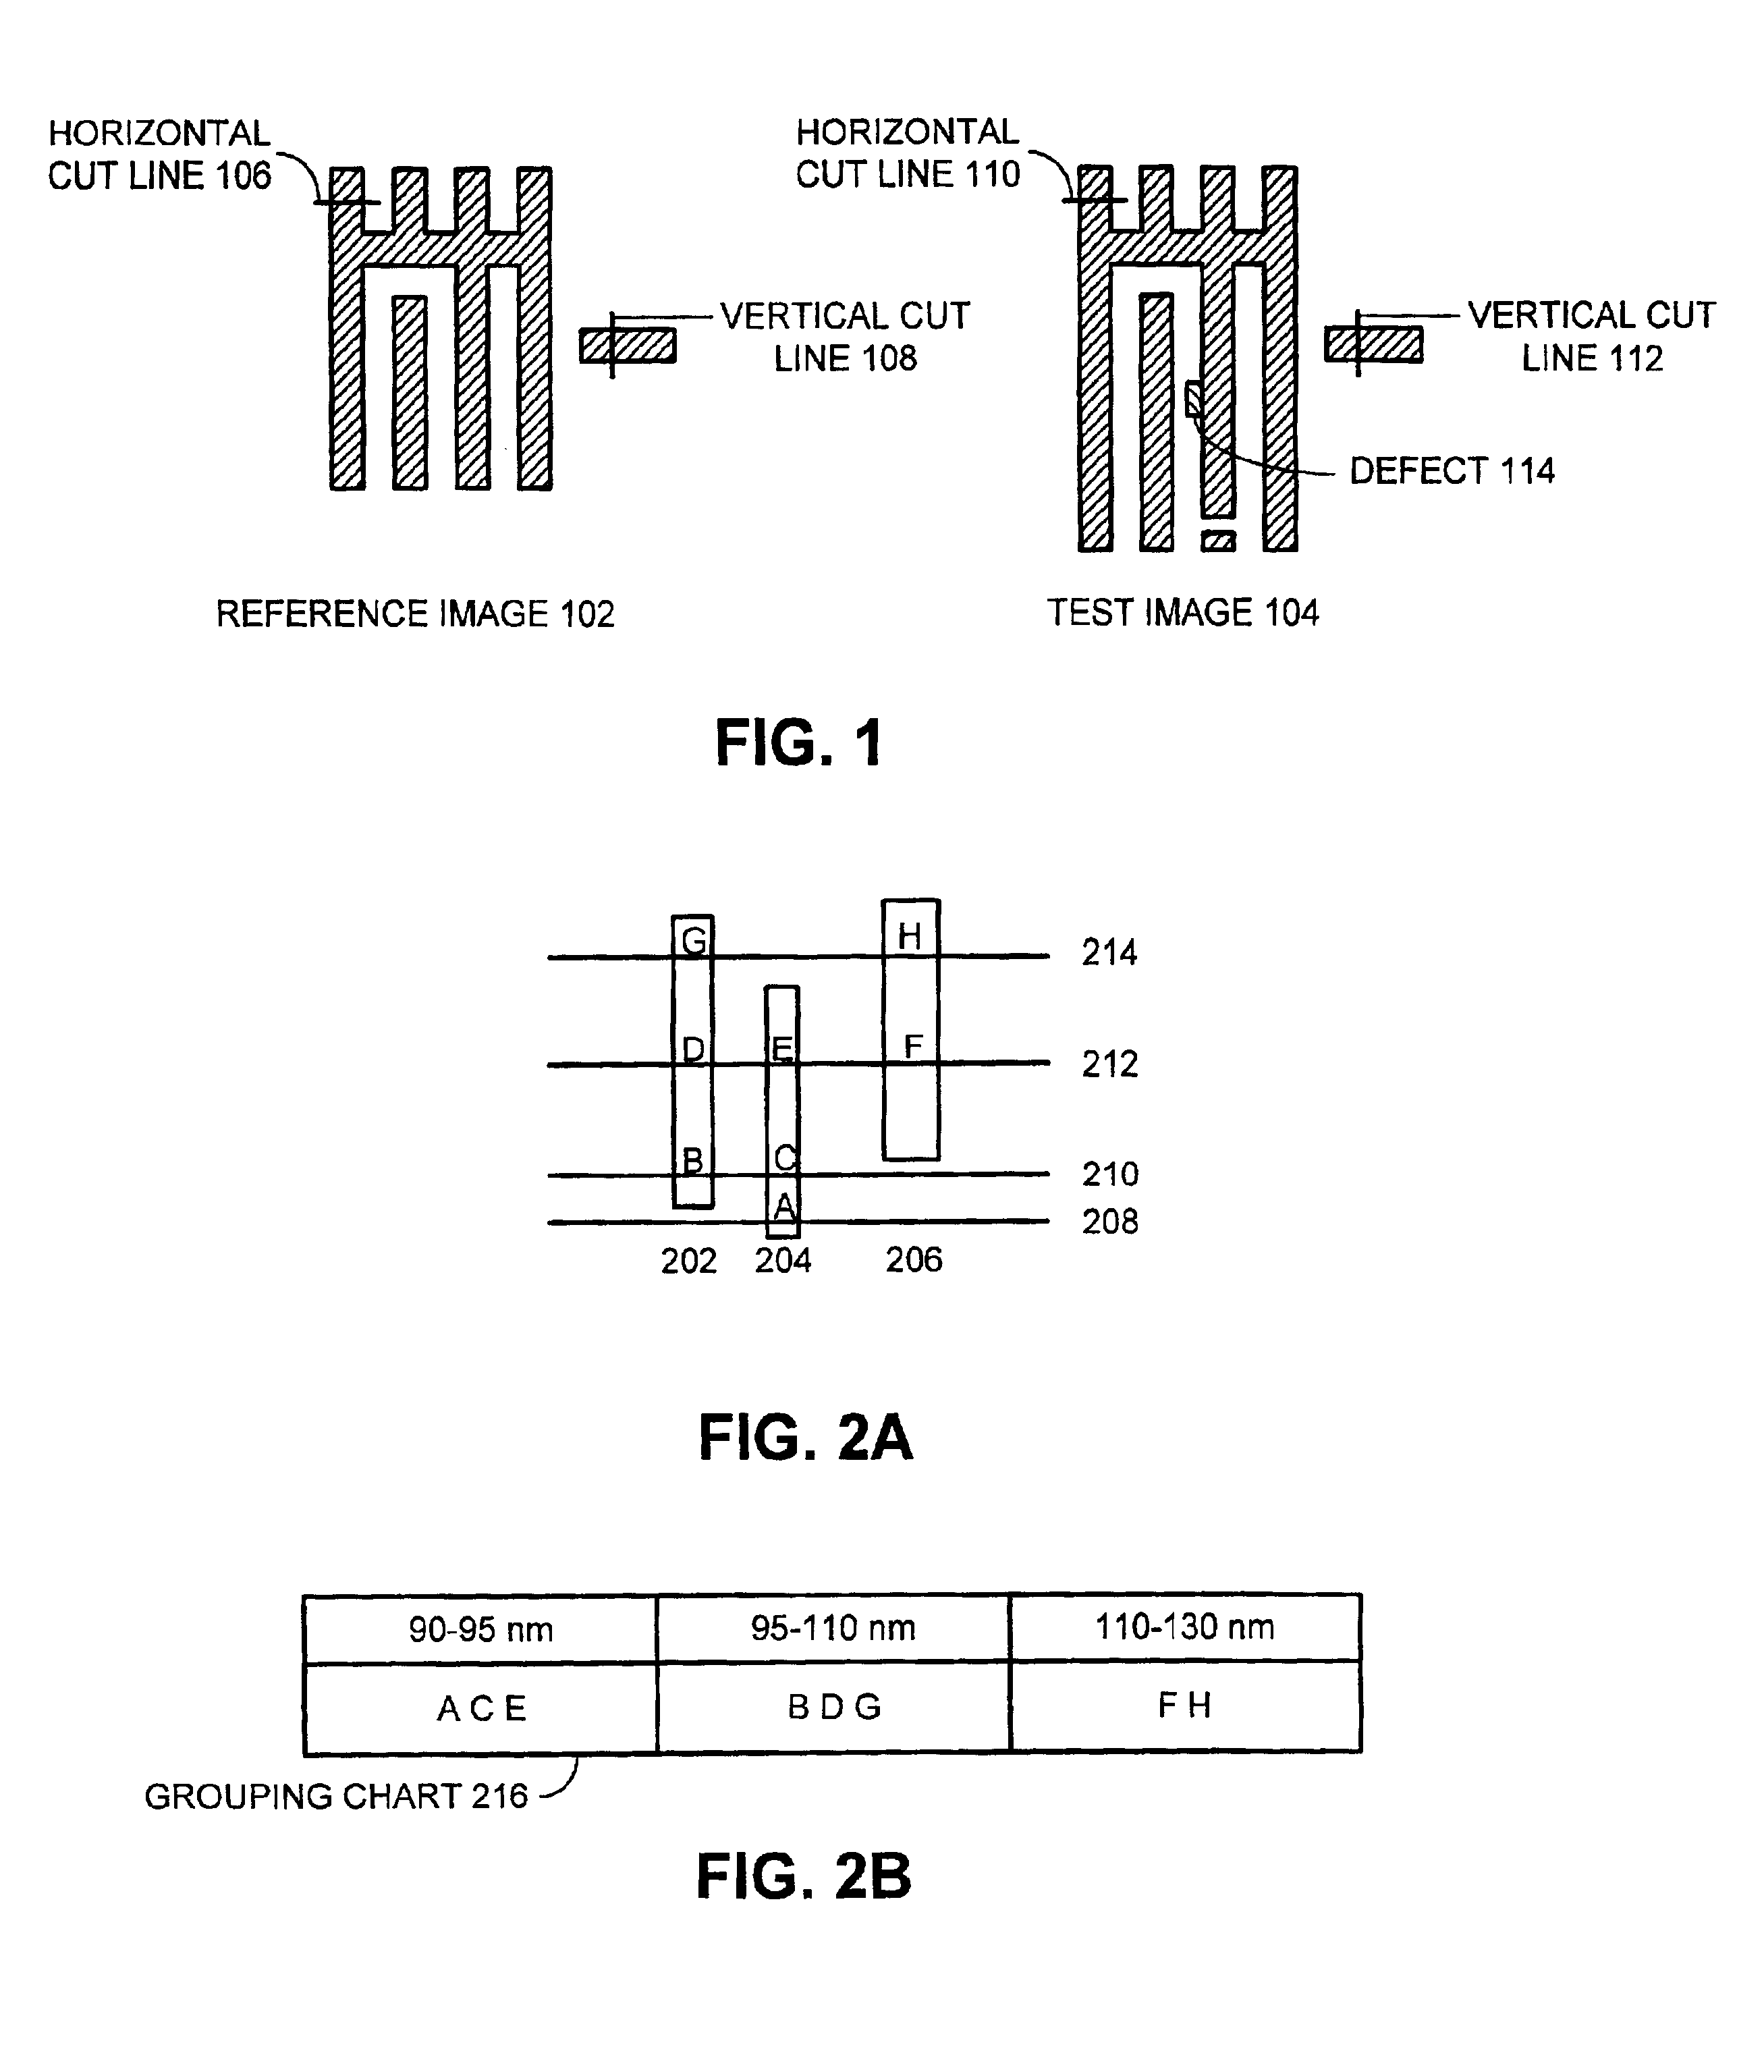 Method and apparatus to facilitate auto-alignment of images for defect inspection and defect analysis